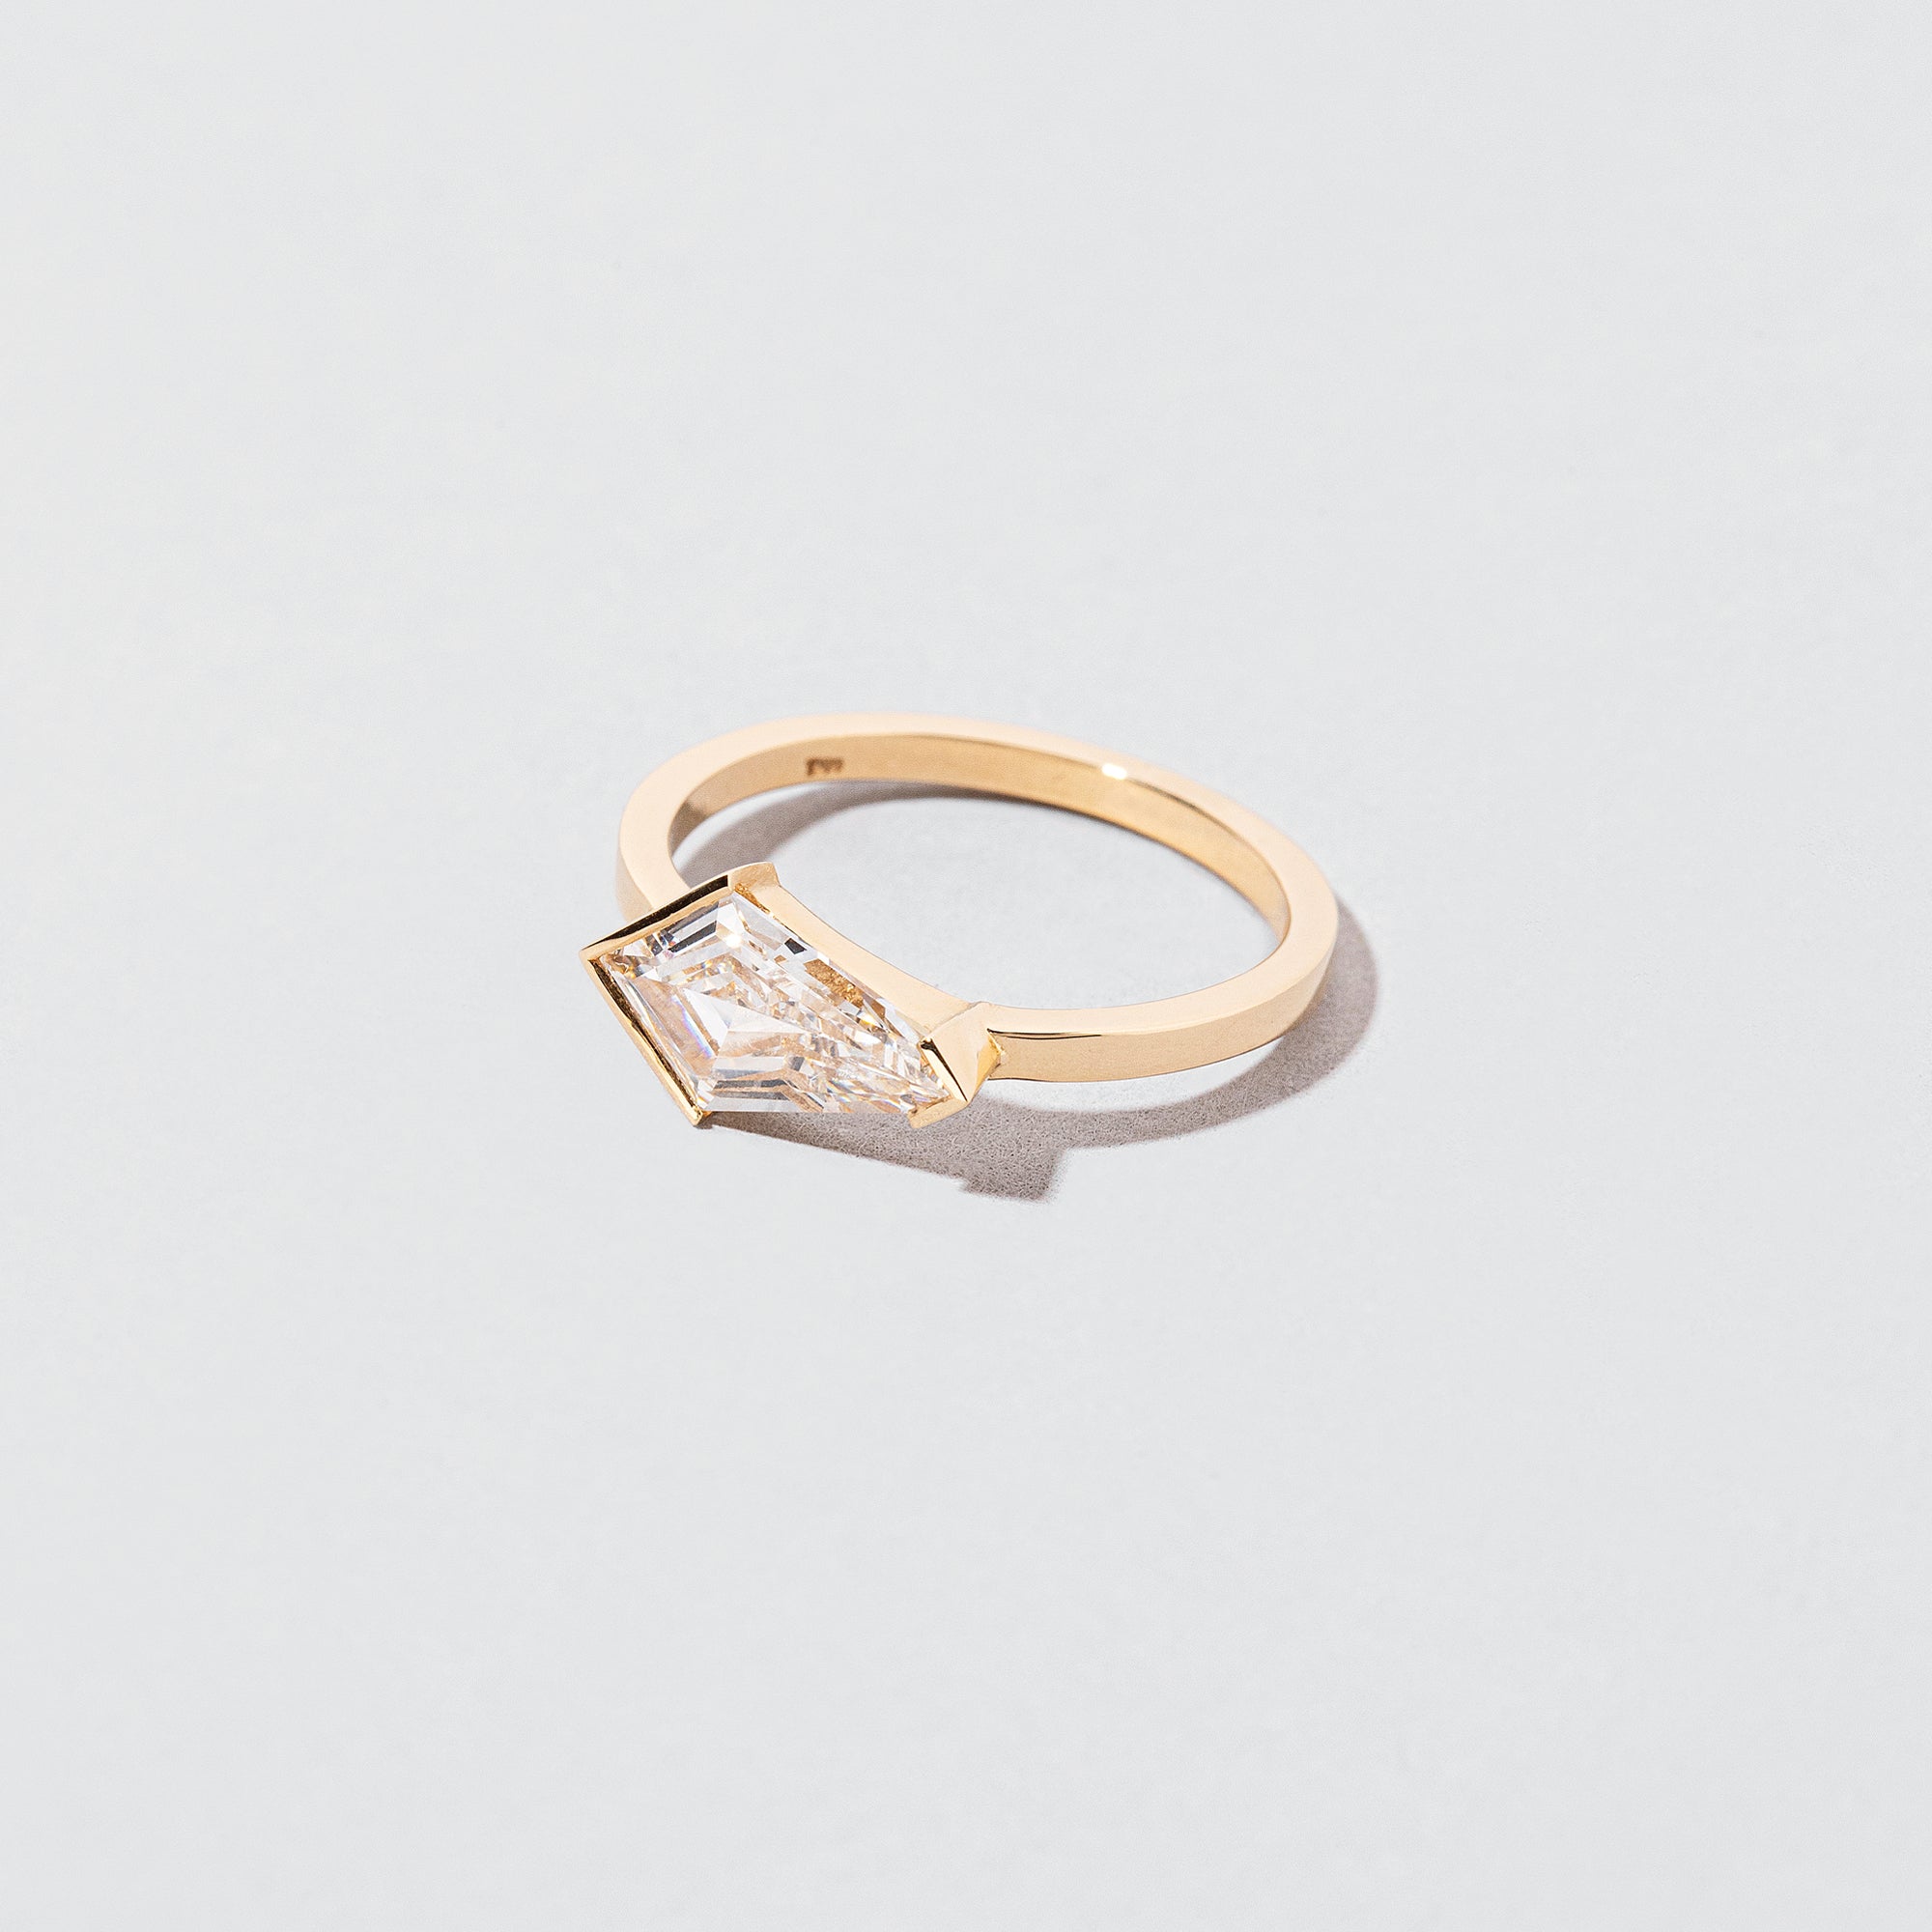 product_details:: Dione Ring on light color background.